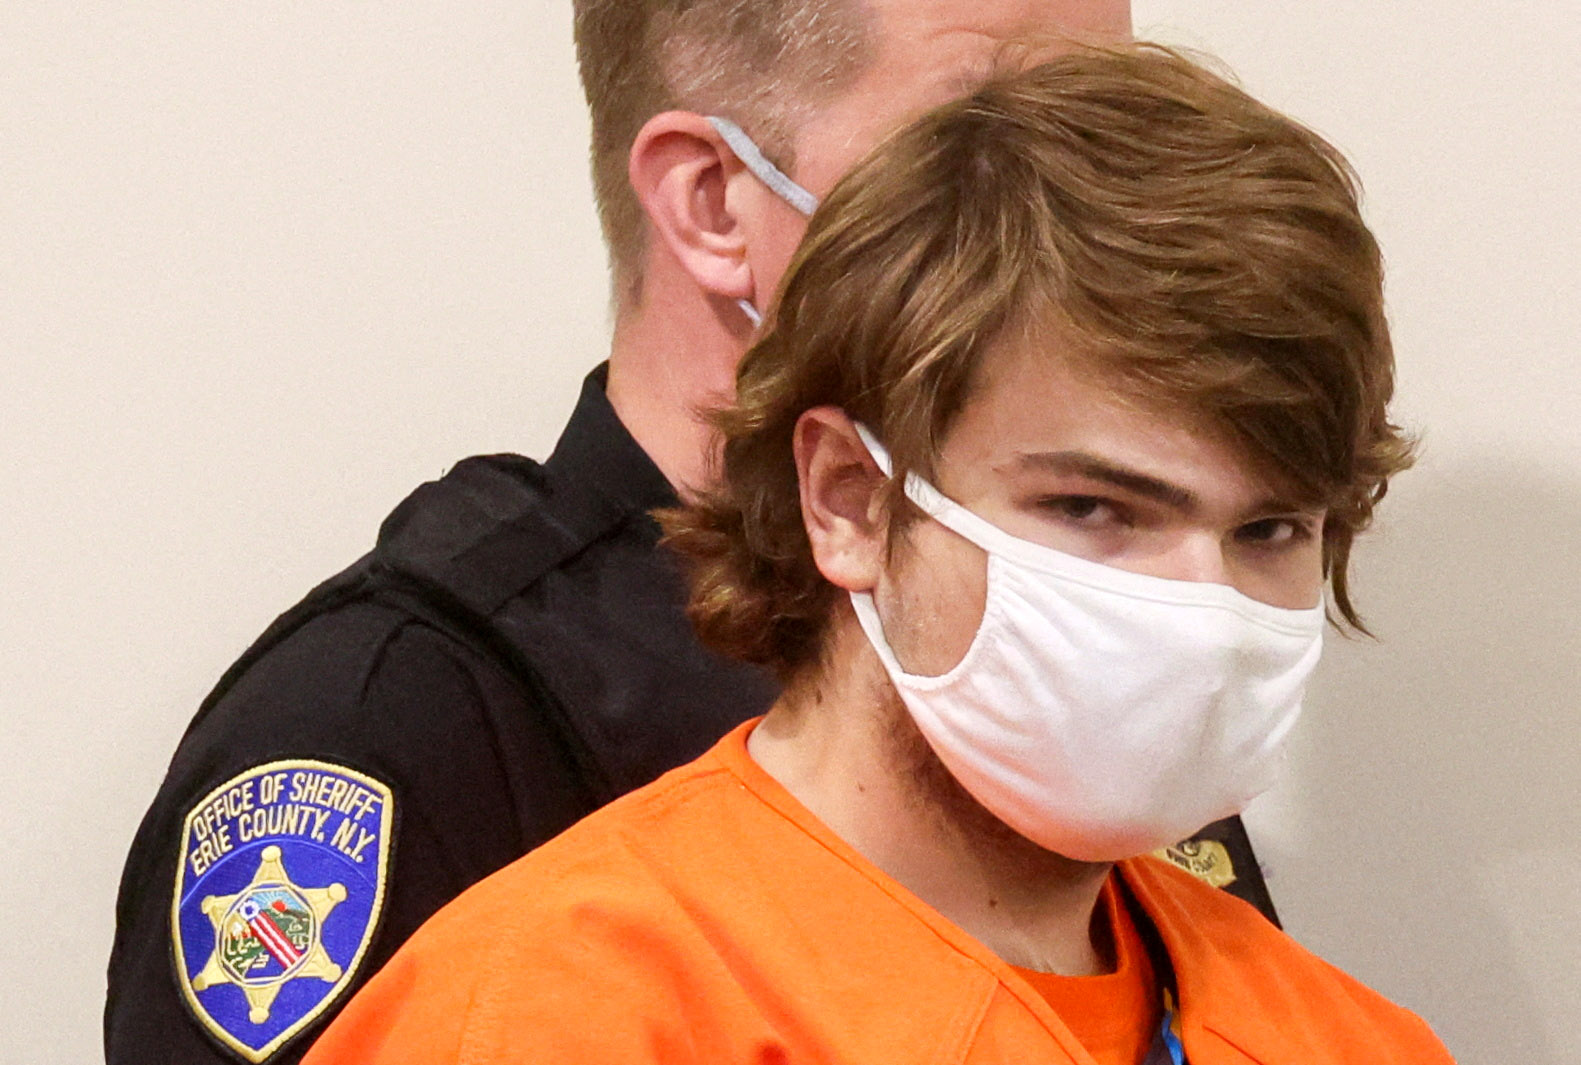 PHOTO: Buffalo shooting suspect, Payton S. Gendron, appears in court accused of killing 10 people in a live-streamed supermarket shooting in a Black neighborhood of Buffalo, N.Y., May 19, 2022. 